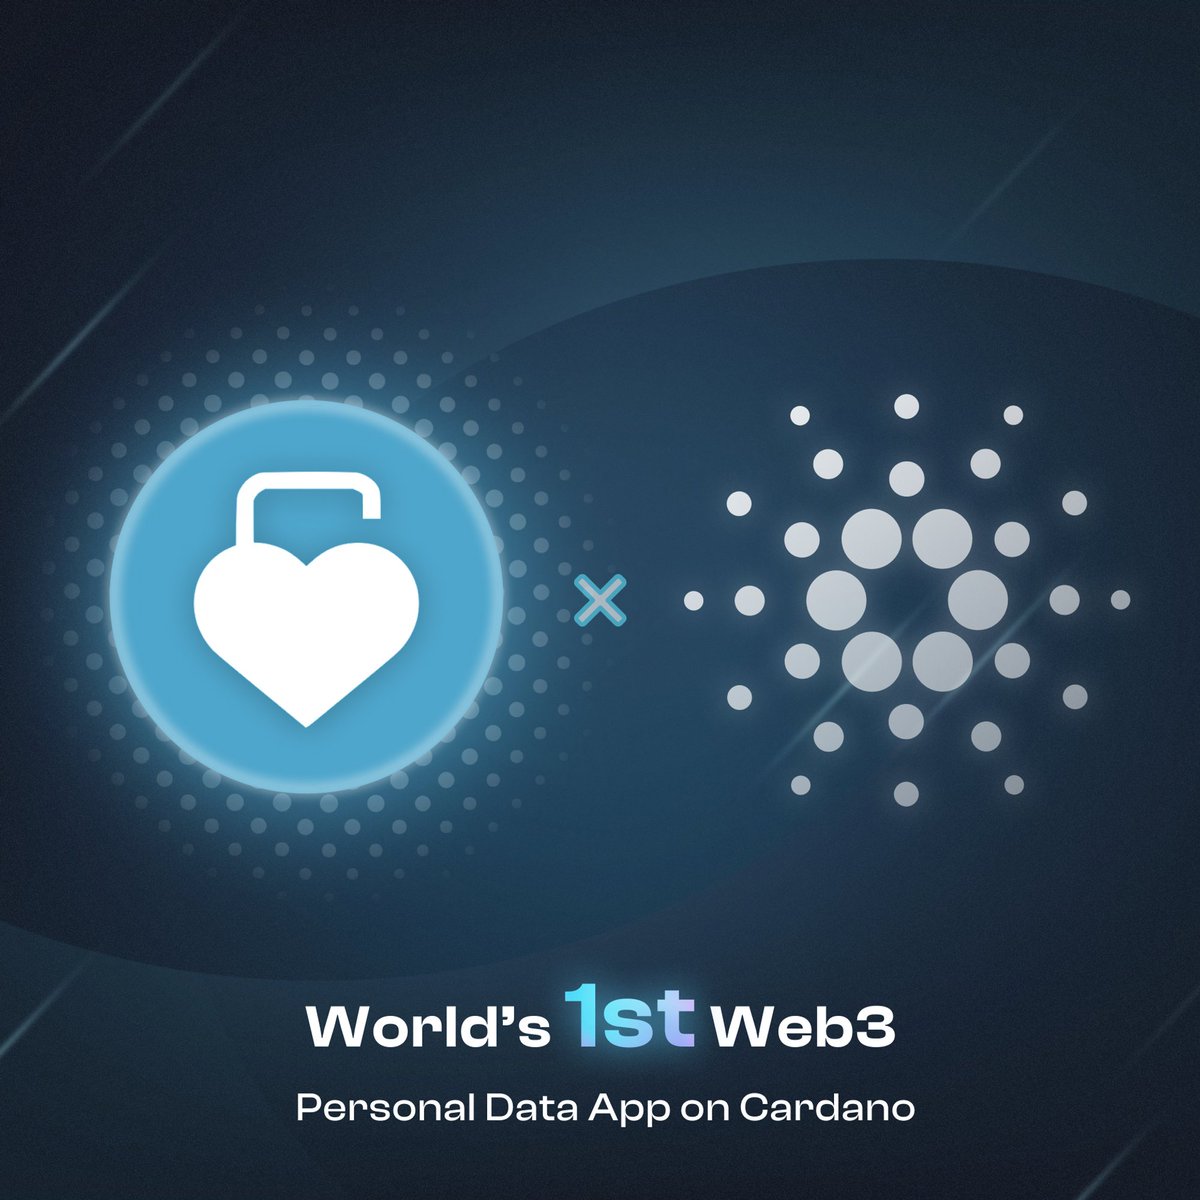 We’re launching the world’s 1st Web3 Personal Data App on Cardano